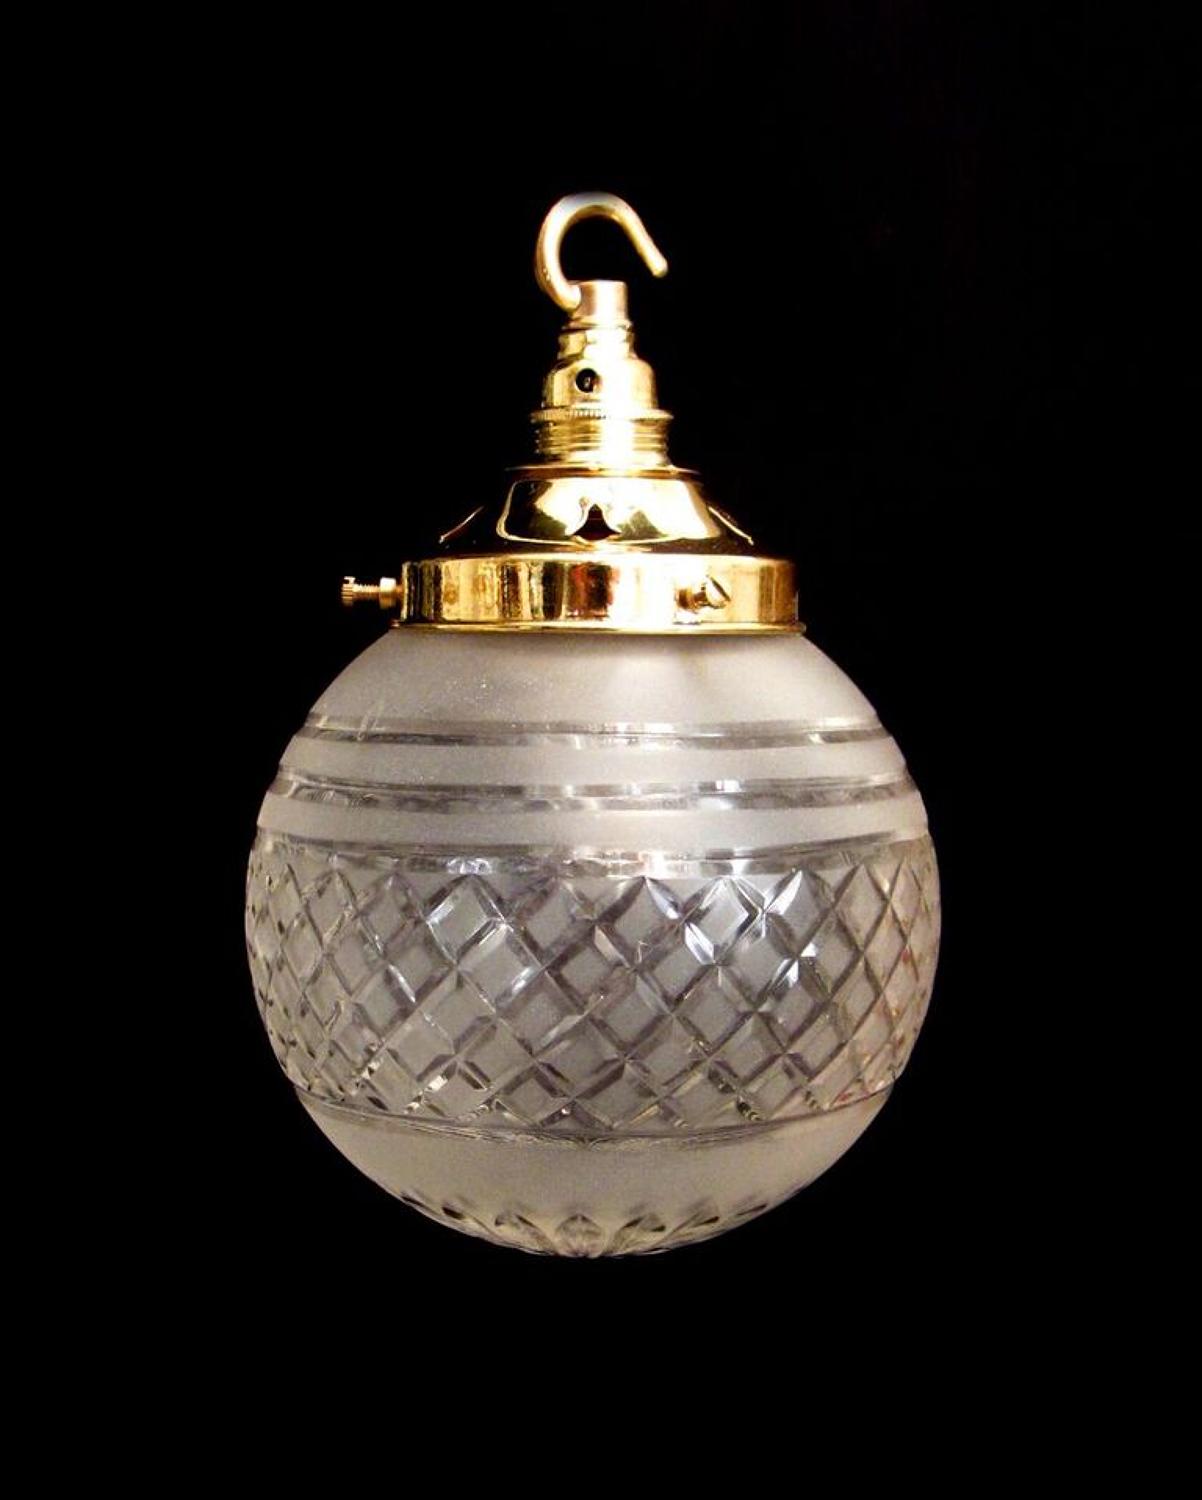 A frosted cut glass globe light